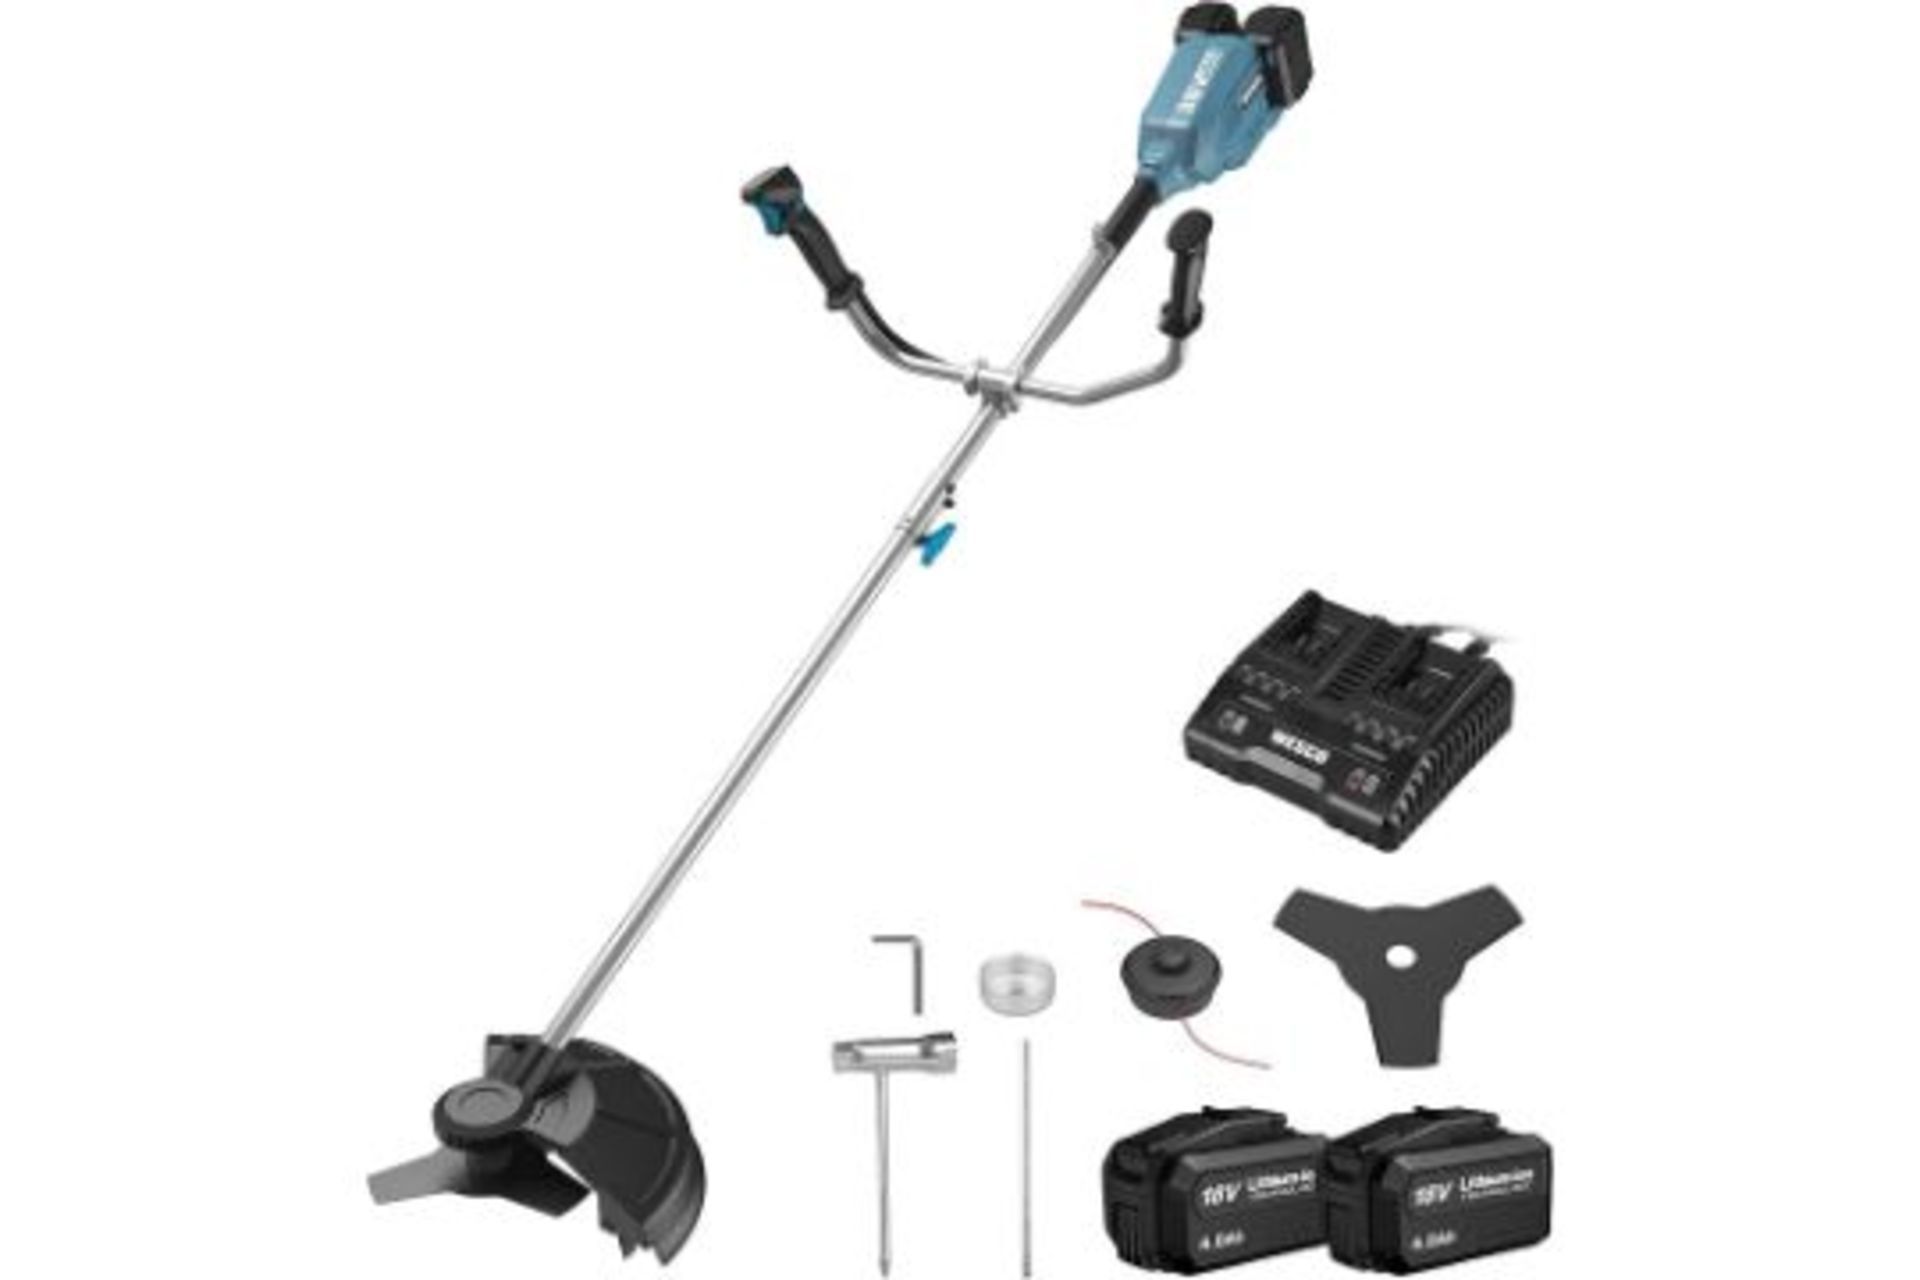 TRADE LOT 6 x New & Boxed WESCO 2-in-1 String Trimmer/Edger with 36V 2 * 4.0 Ah Battery, 380 mm